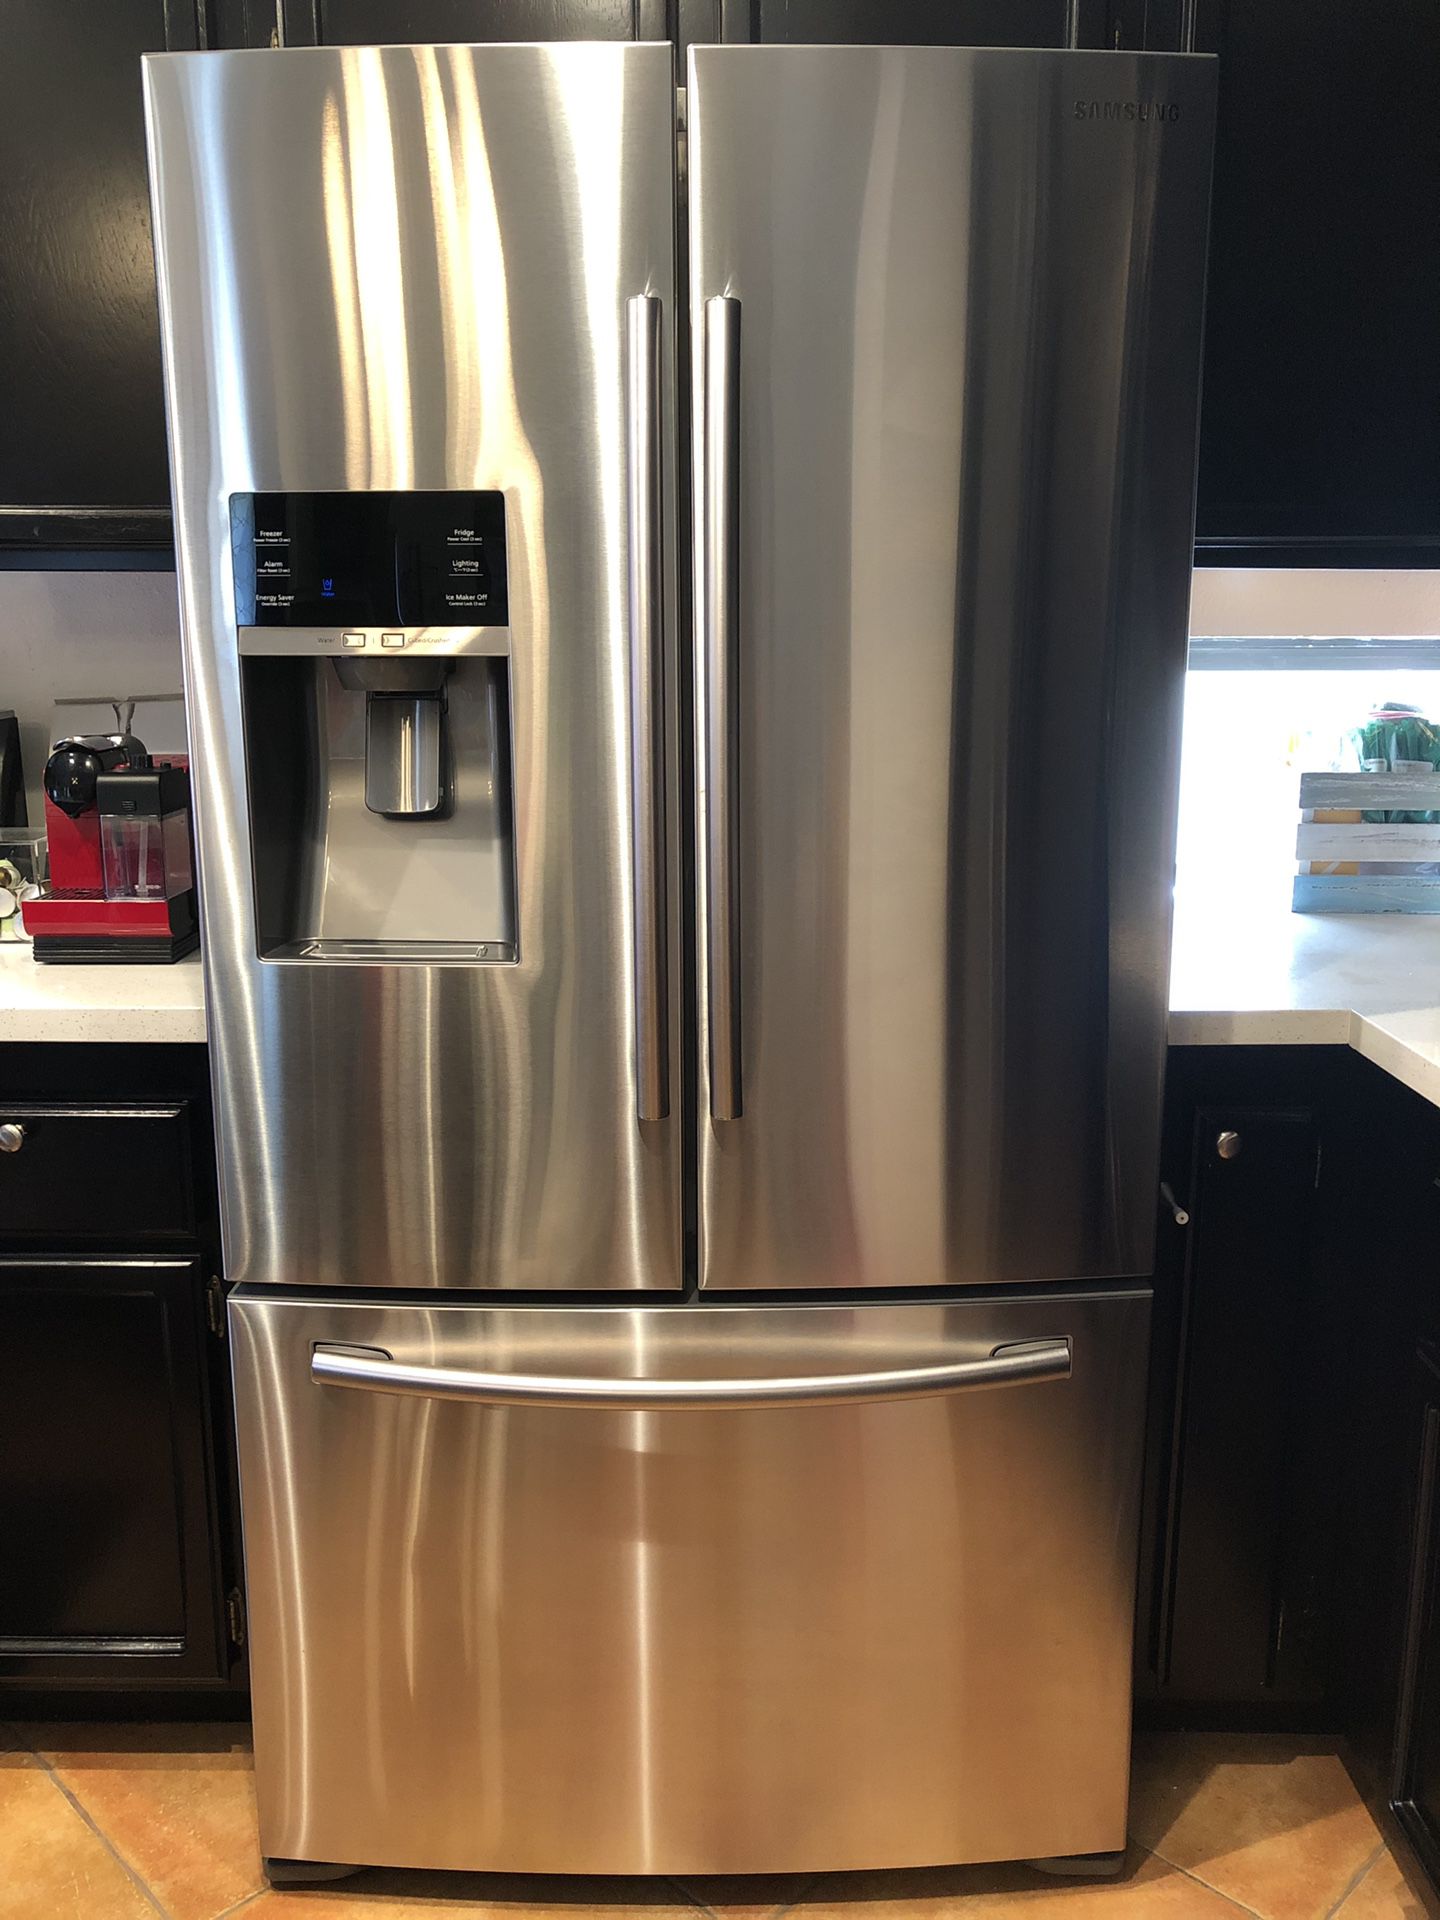 Samsung 22-cu ft Counter-Depth French Door Refrigerator with Ice Maker (Stainless Steel)